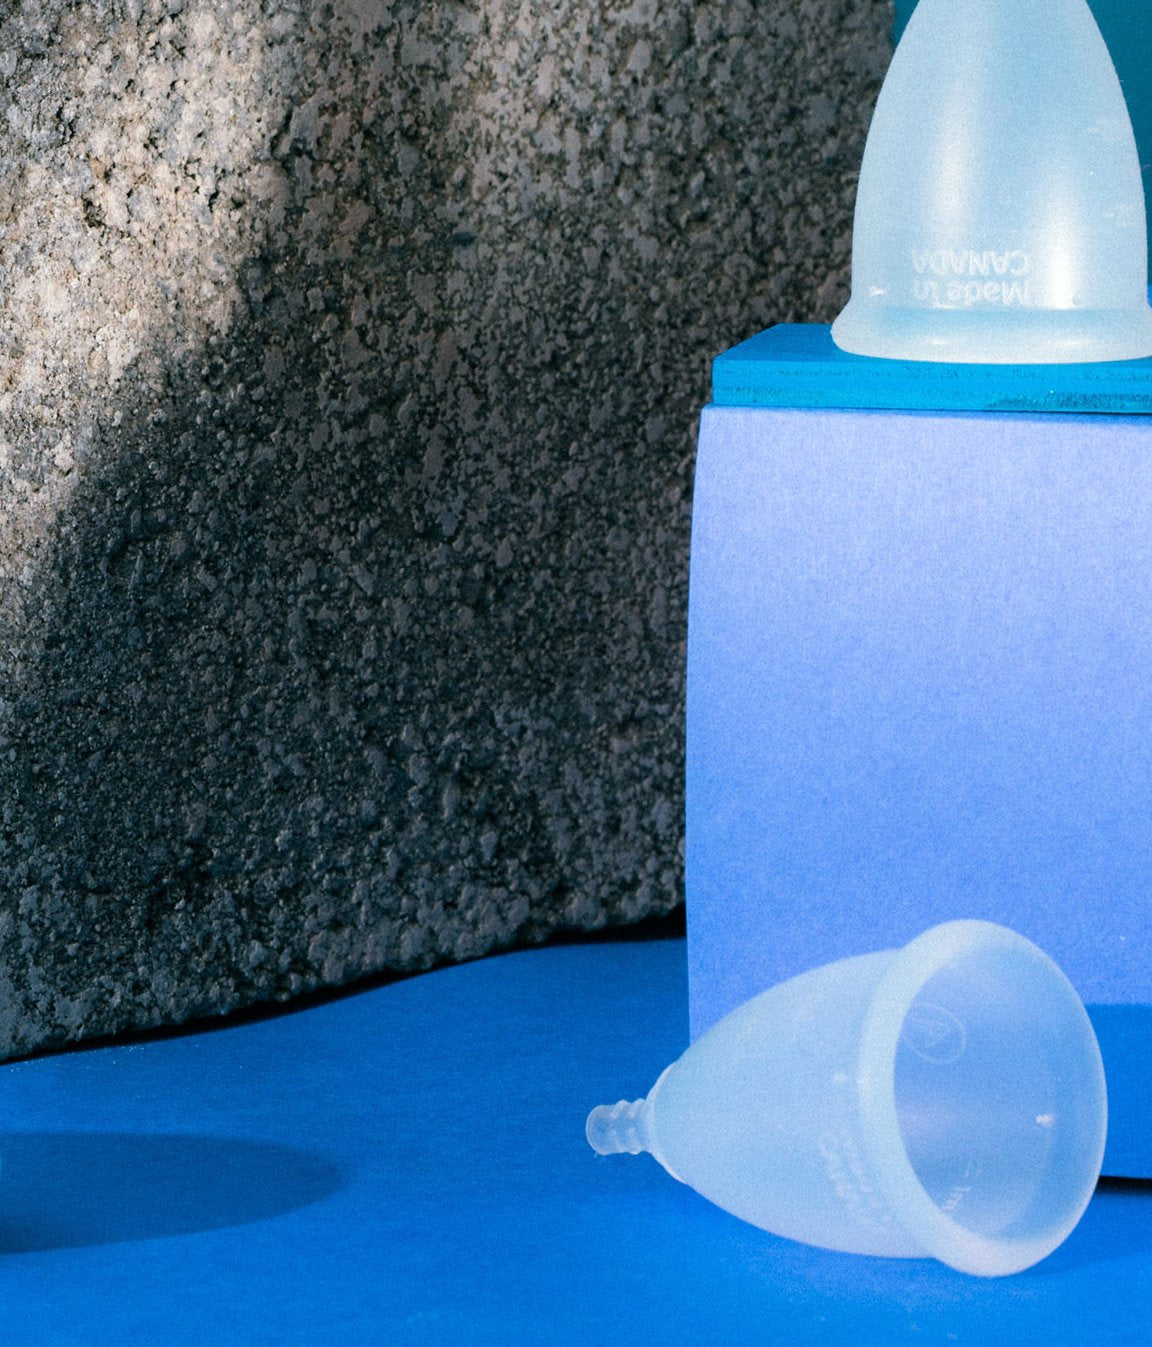 Menstrual Cup – Size B